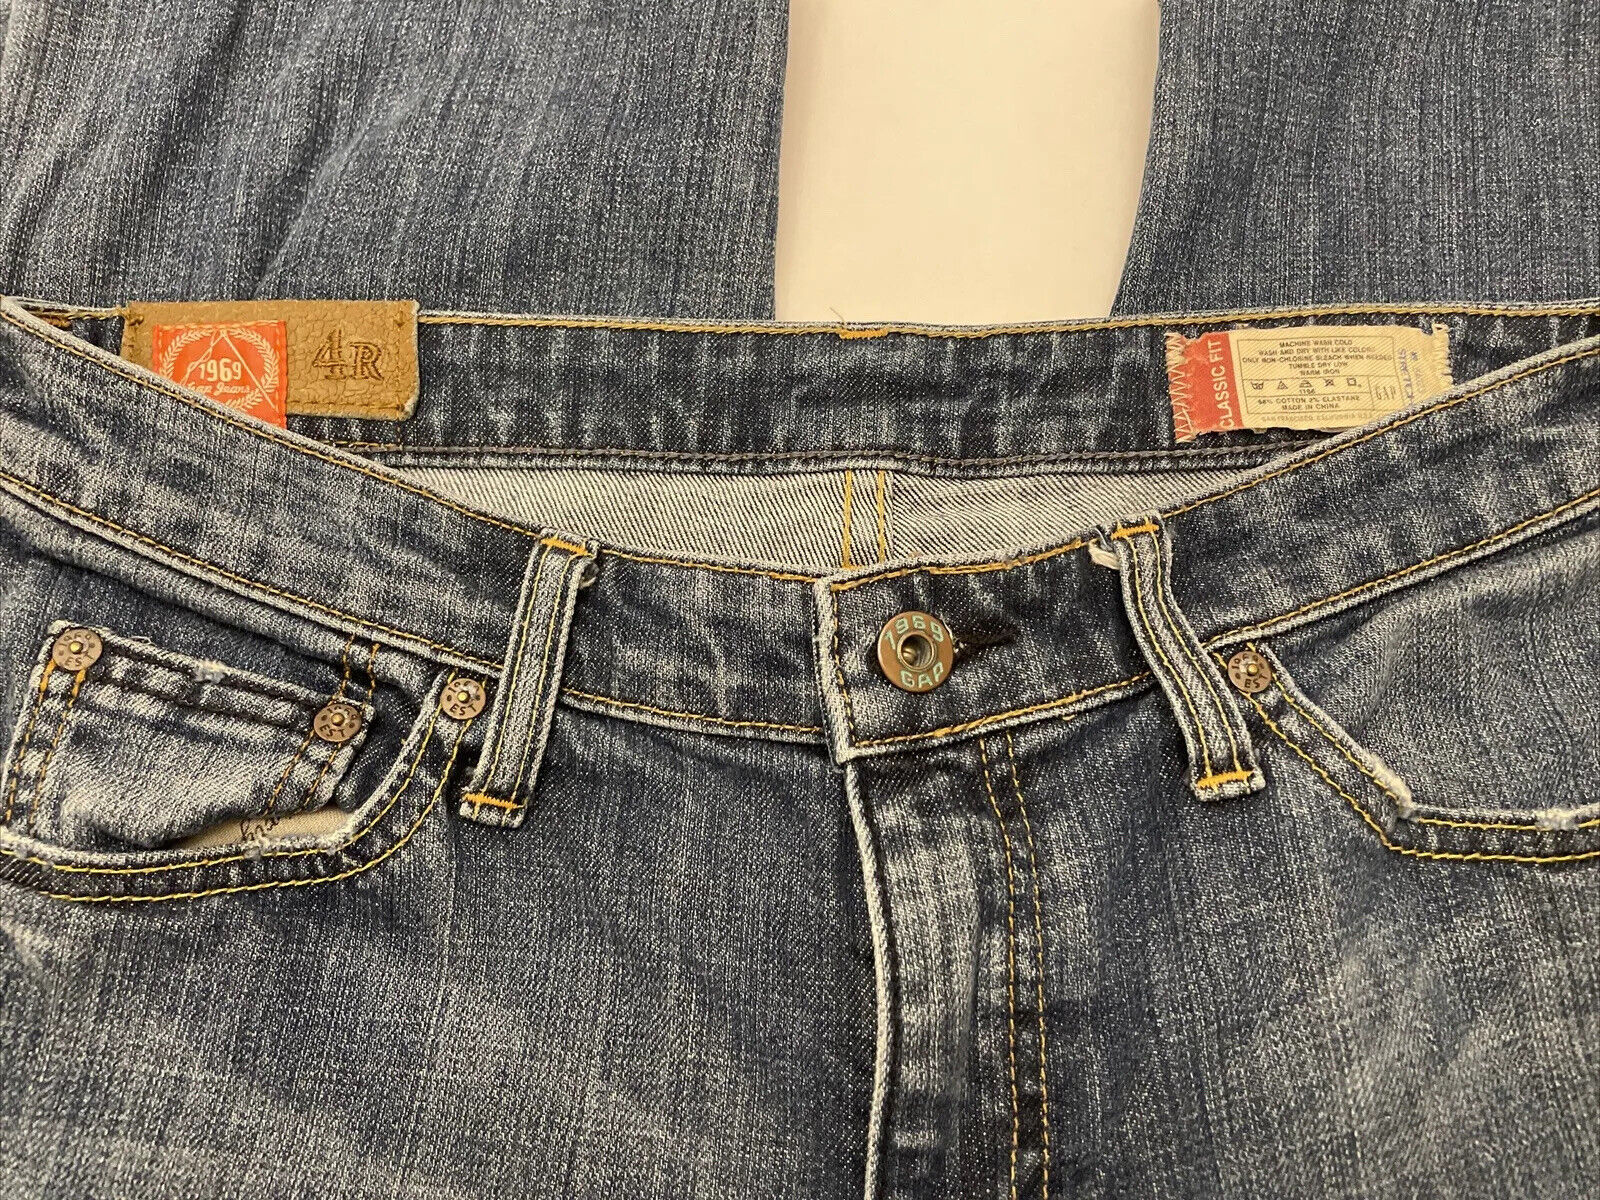 Primary image for Women’s Gap Jeans 1969 Classic Fit Size 4R Denim Cotton Style 54023 Blue Niceee